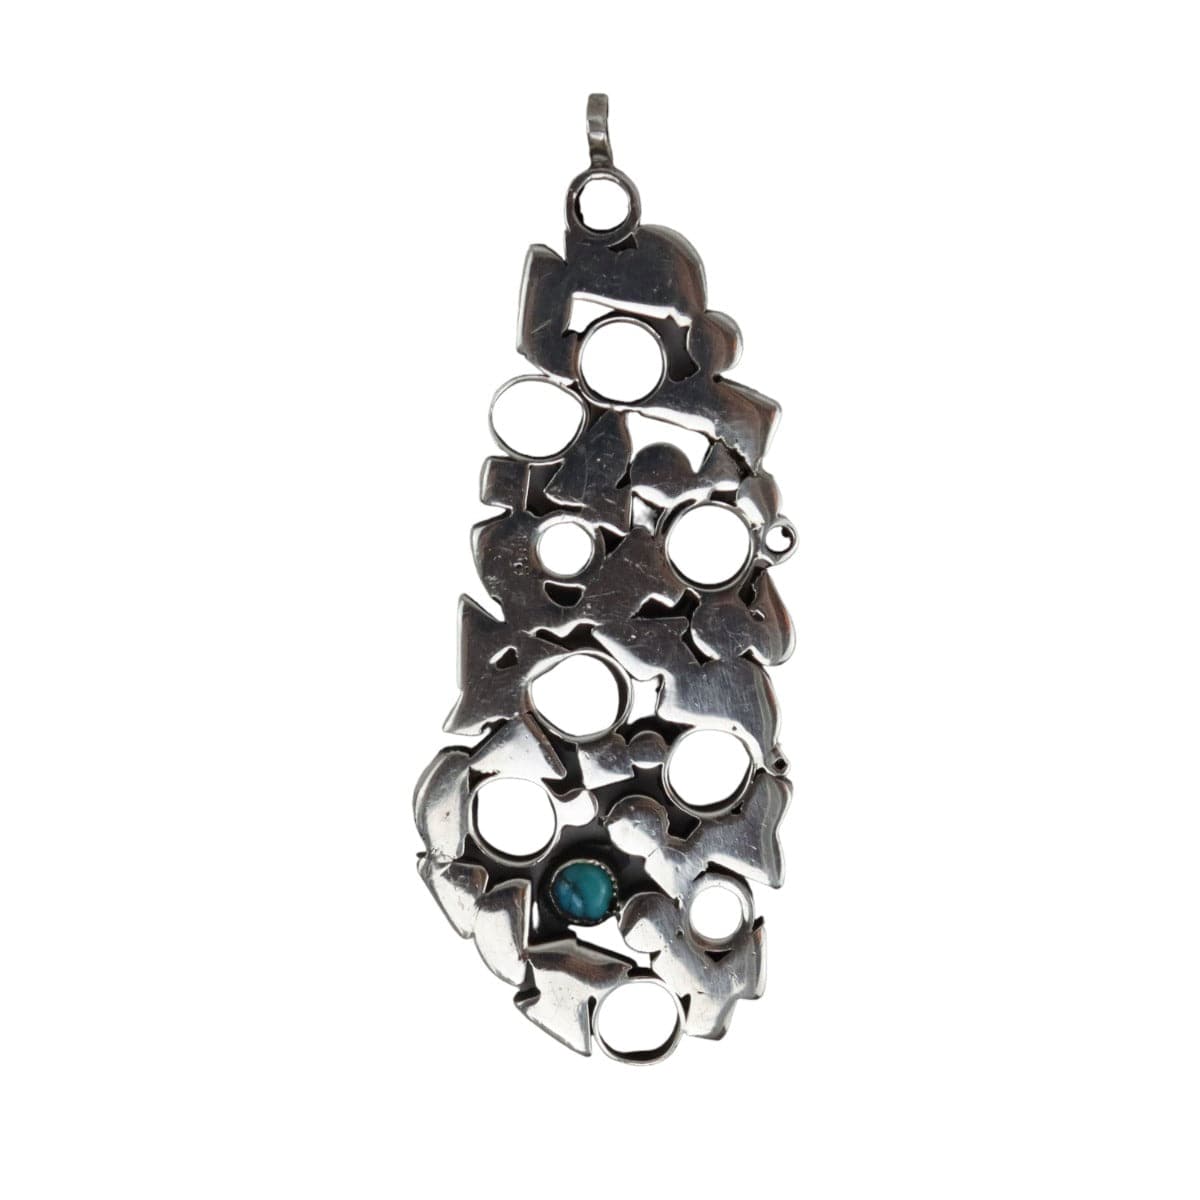 Frank Patania Jr. - Turquoise and Silver Pendant c. 1965, 2.75" x 1" (J91699-1022-054)